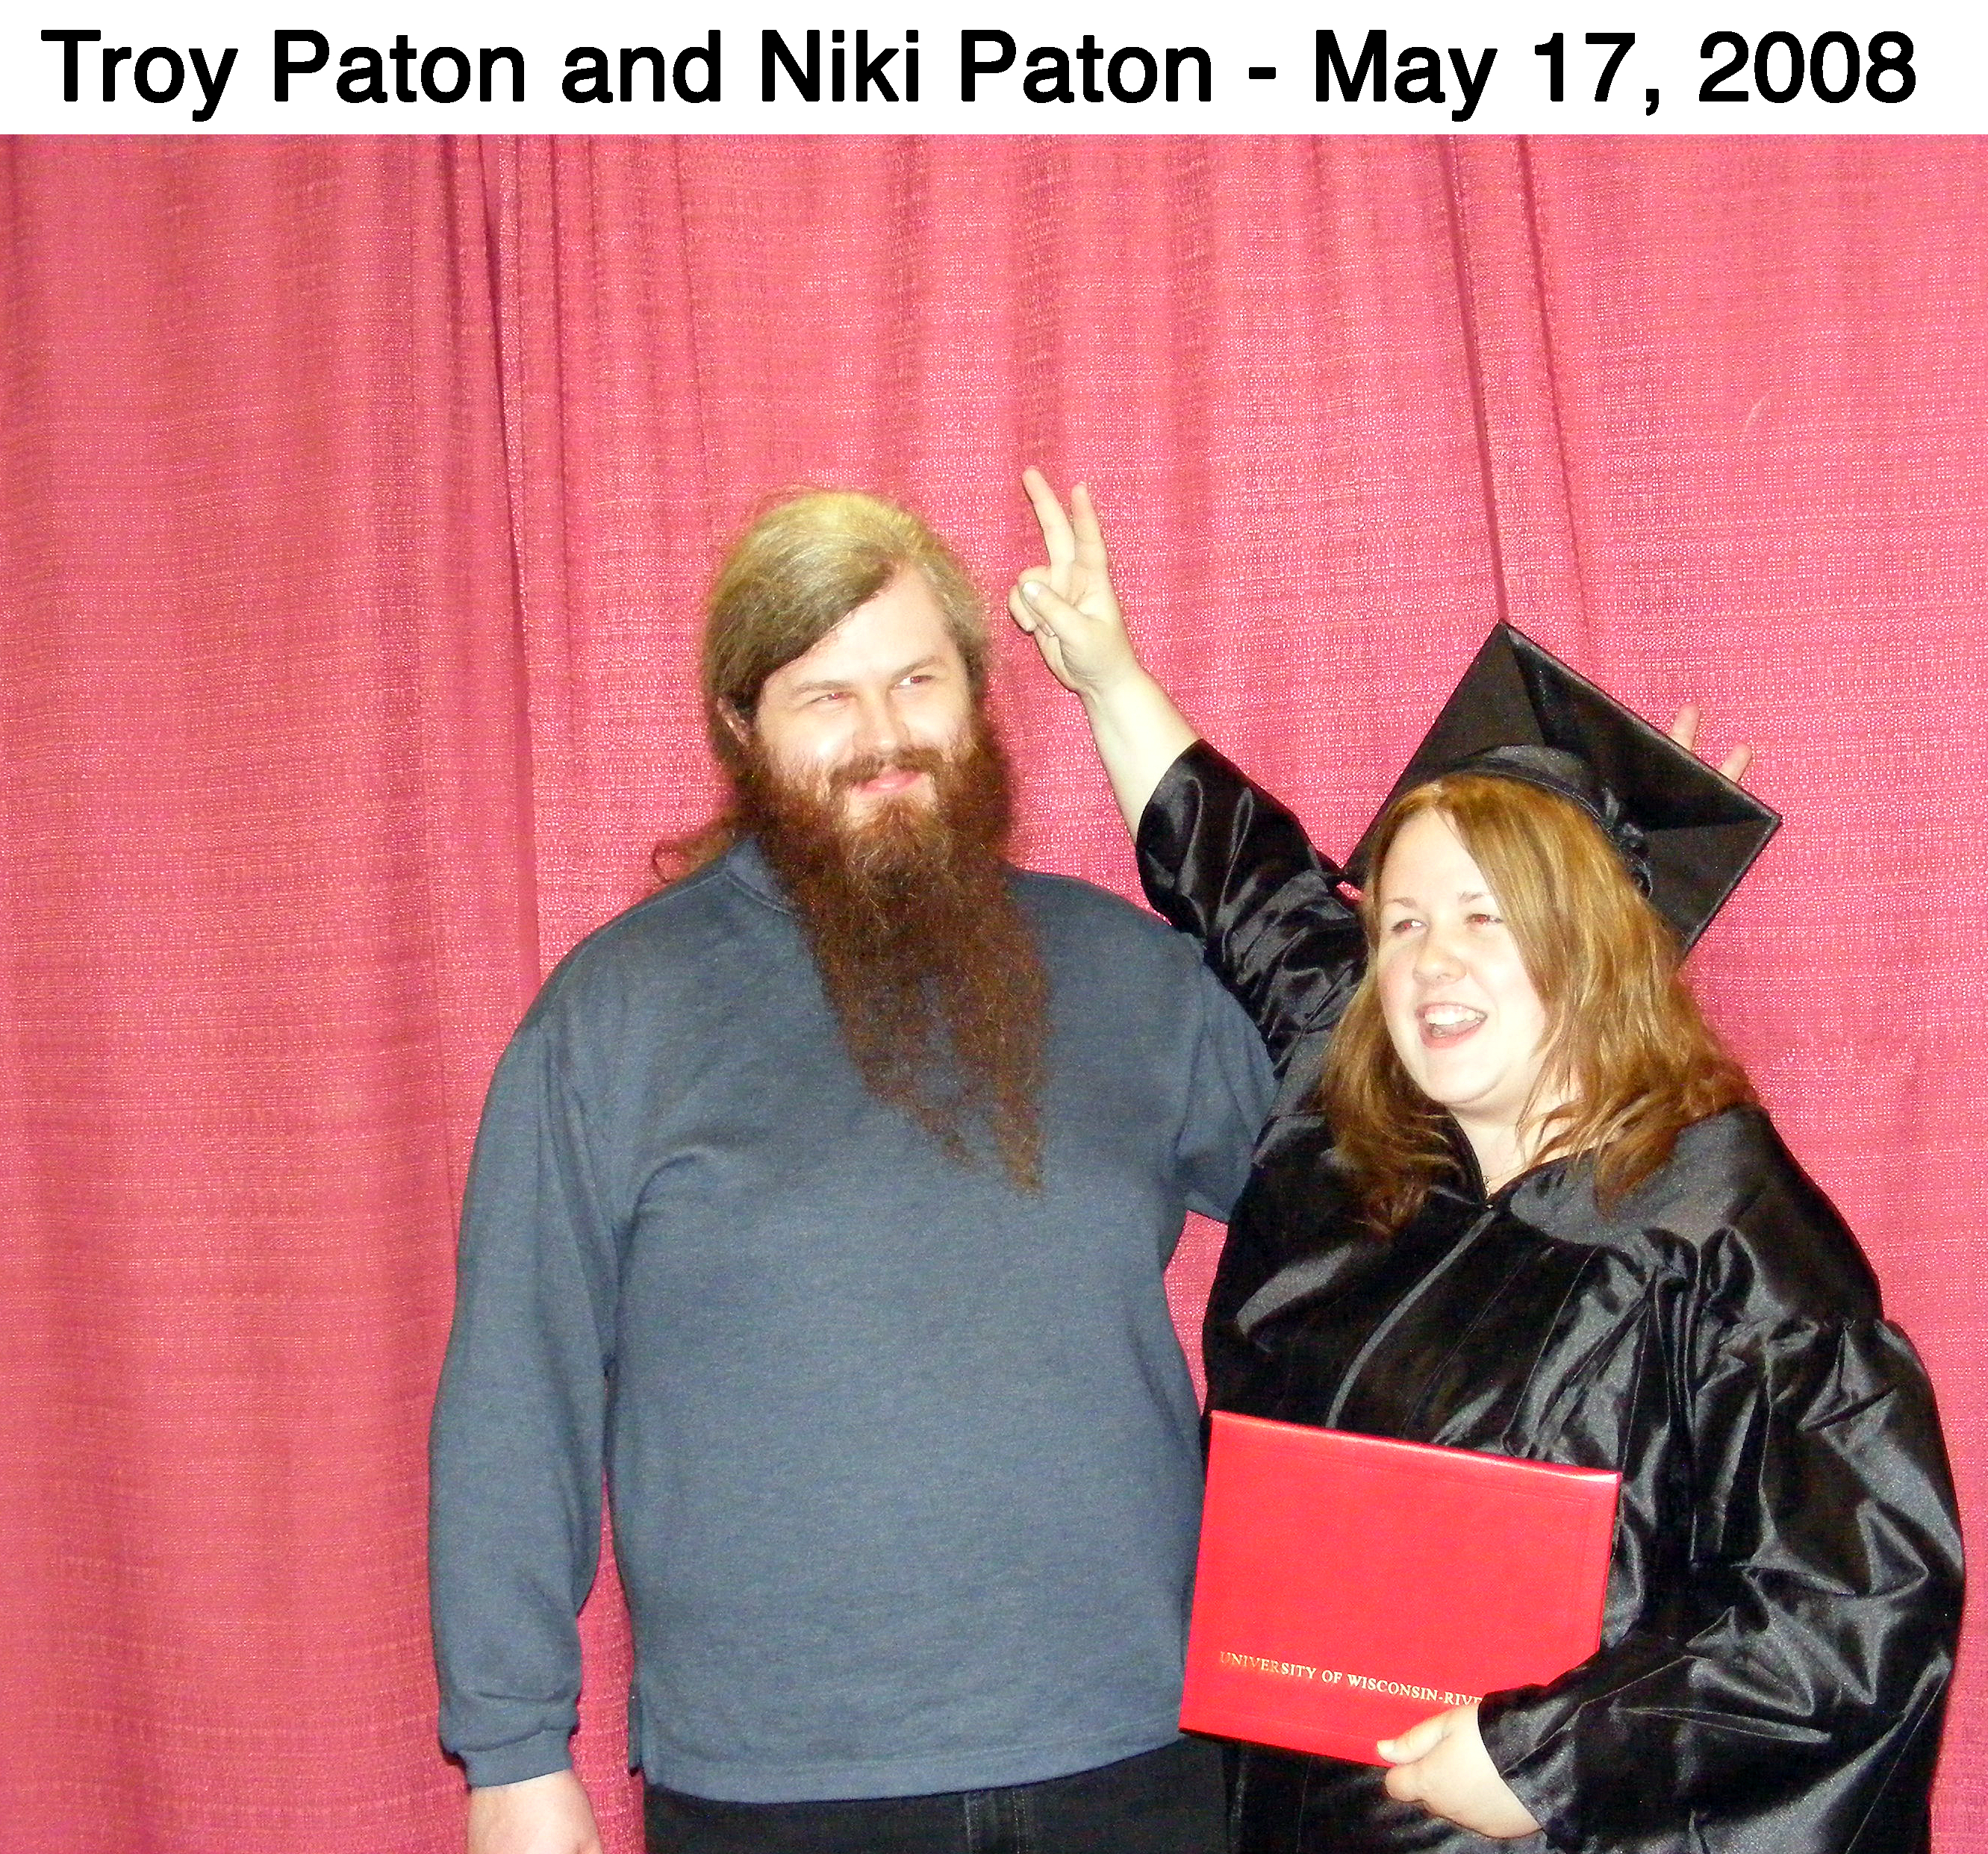 Troy and Niki Paton clowning at her graduation in front of red drapes